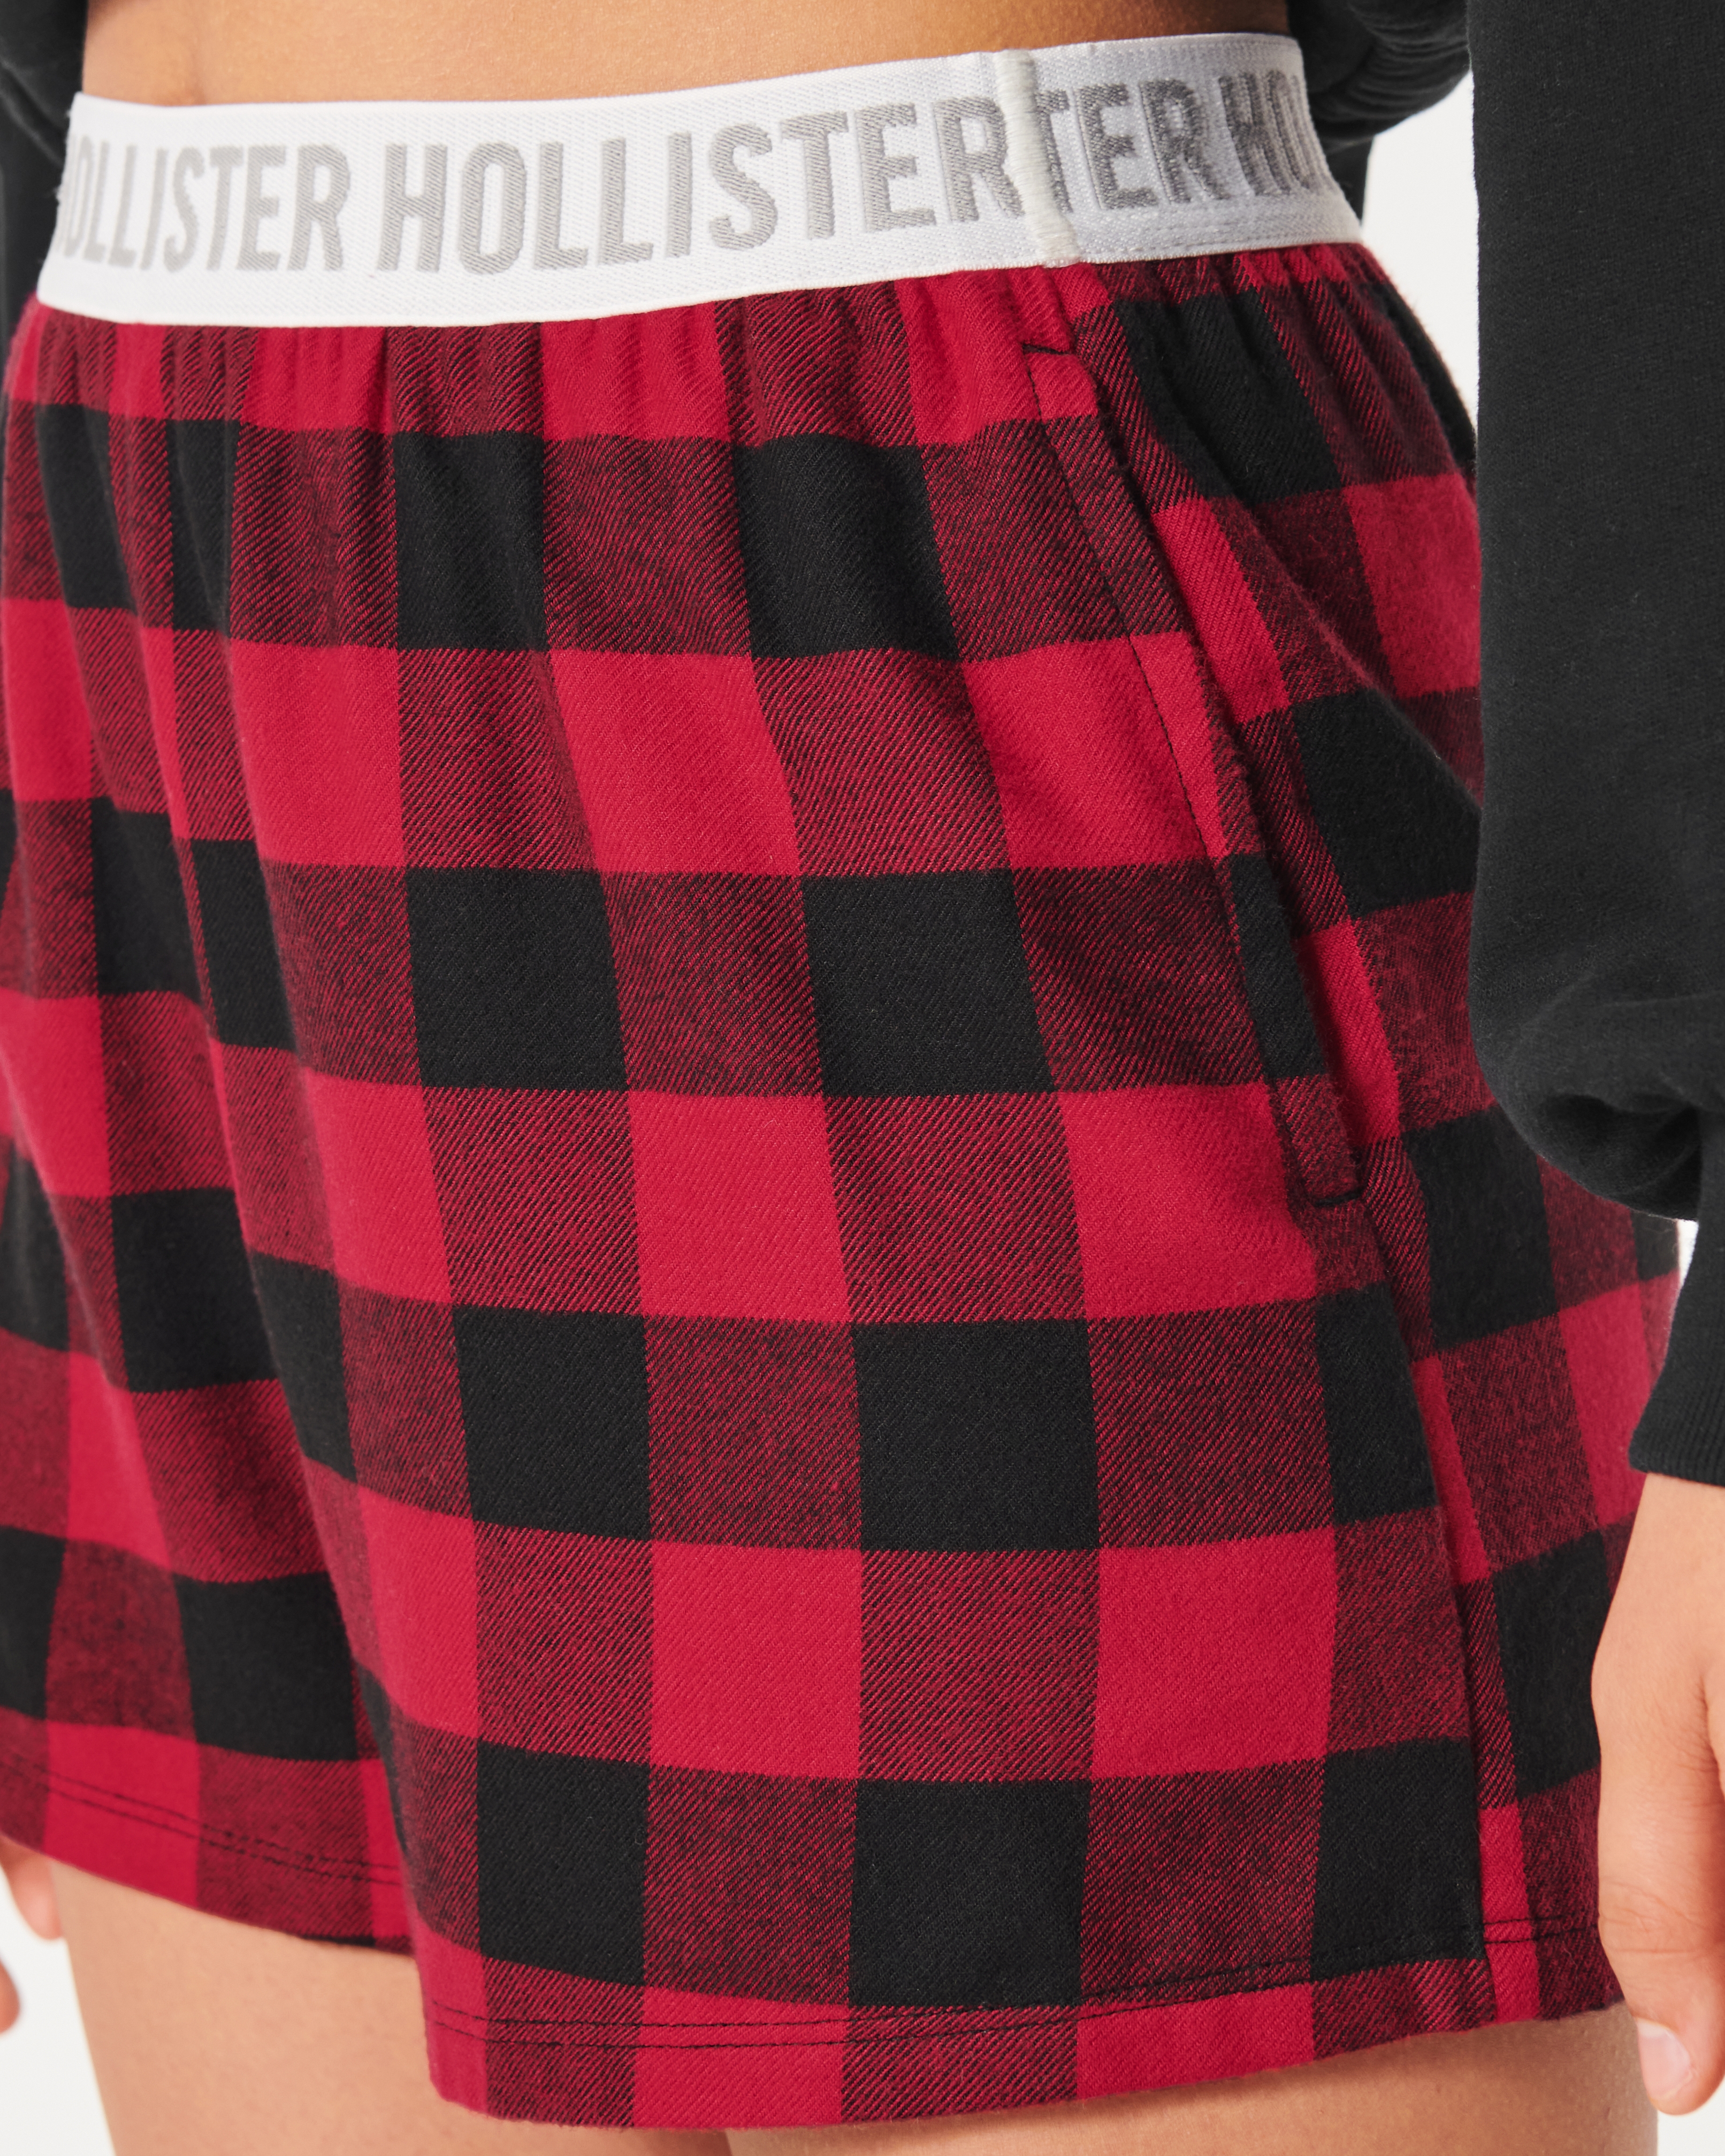 High-Rise Flannel Shorts